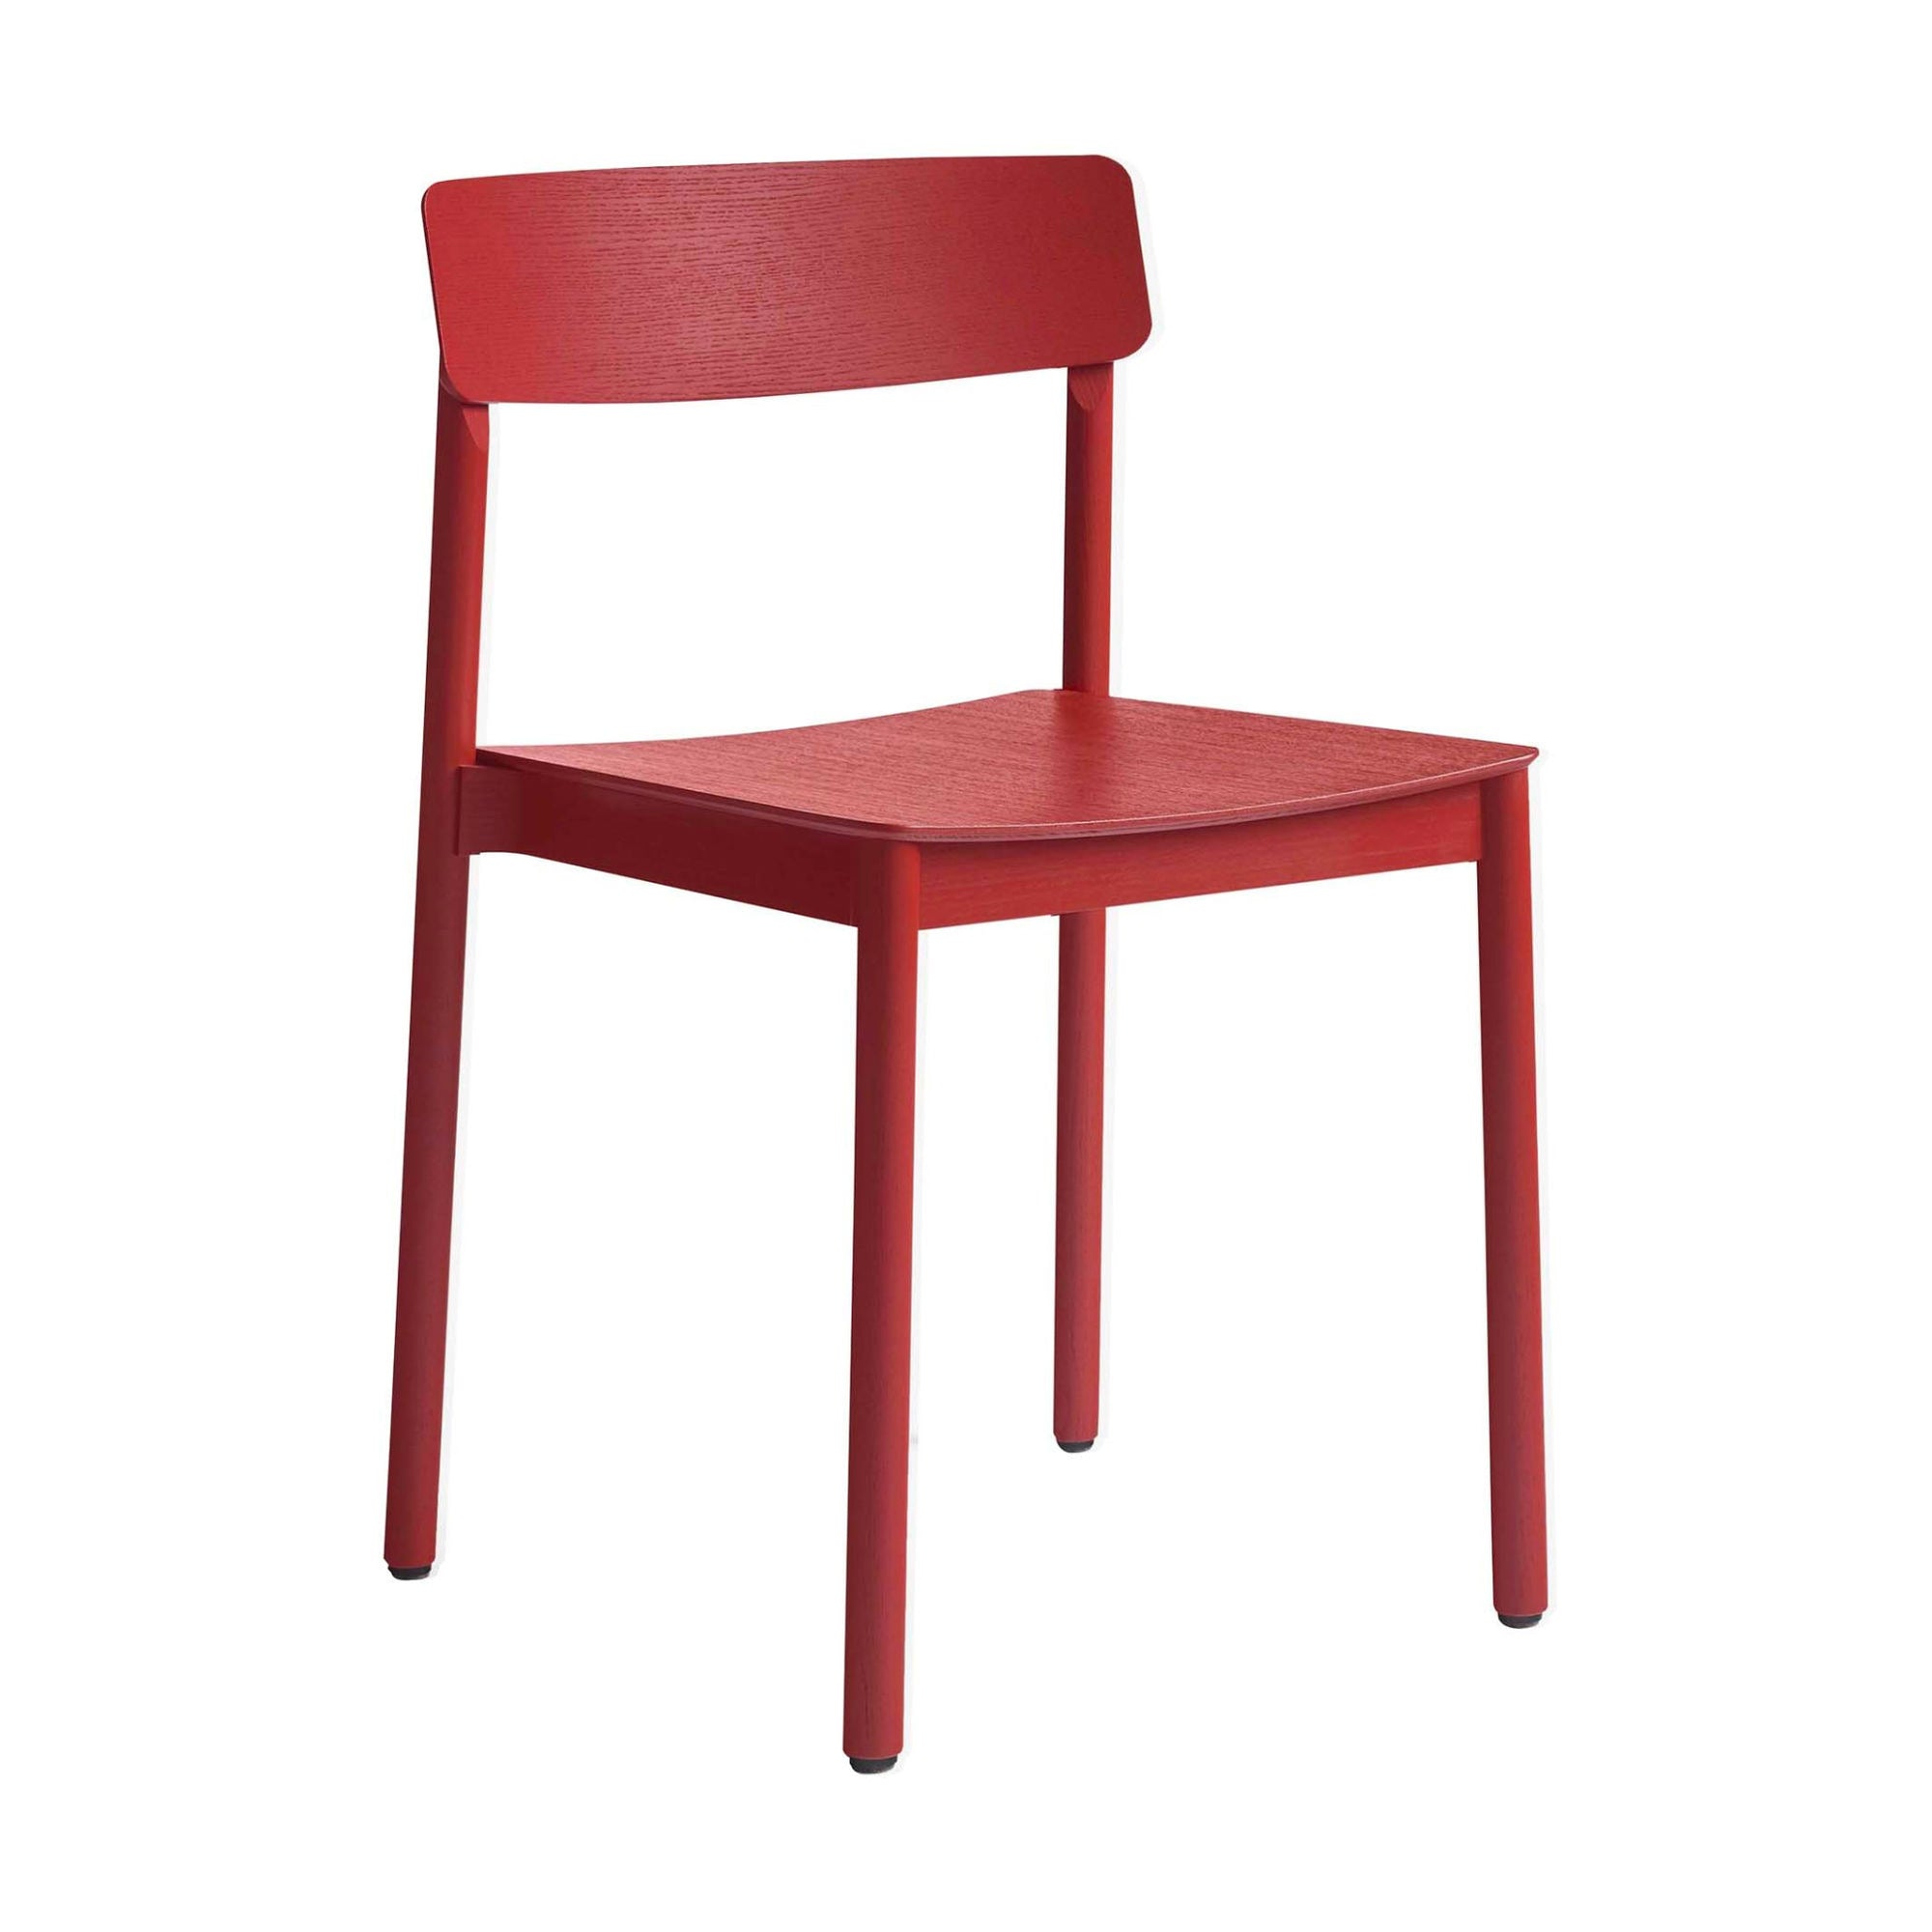 &Tradition Betty TK2 chair, maroon